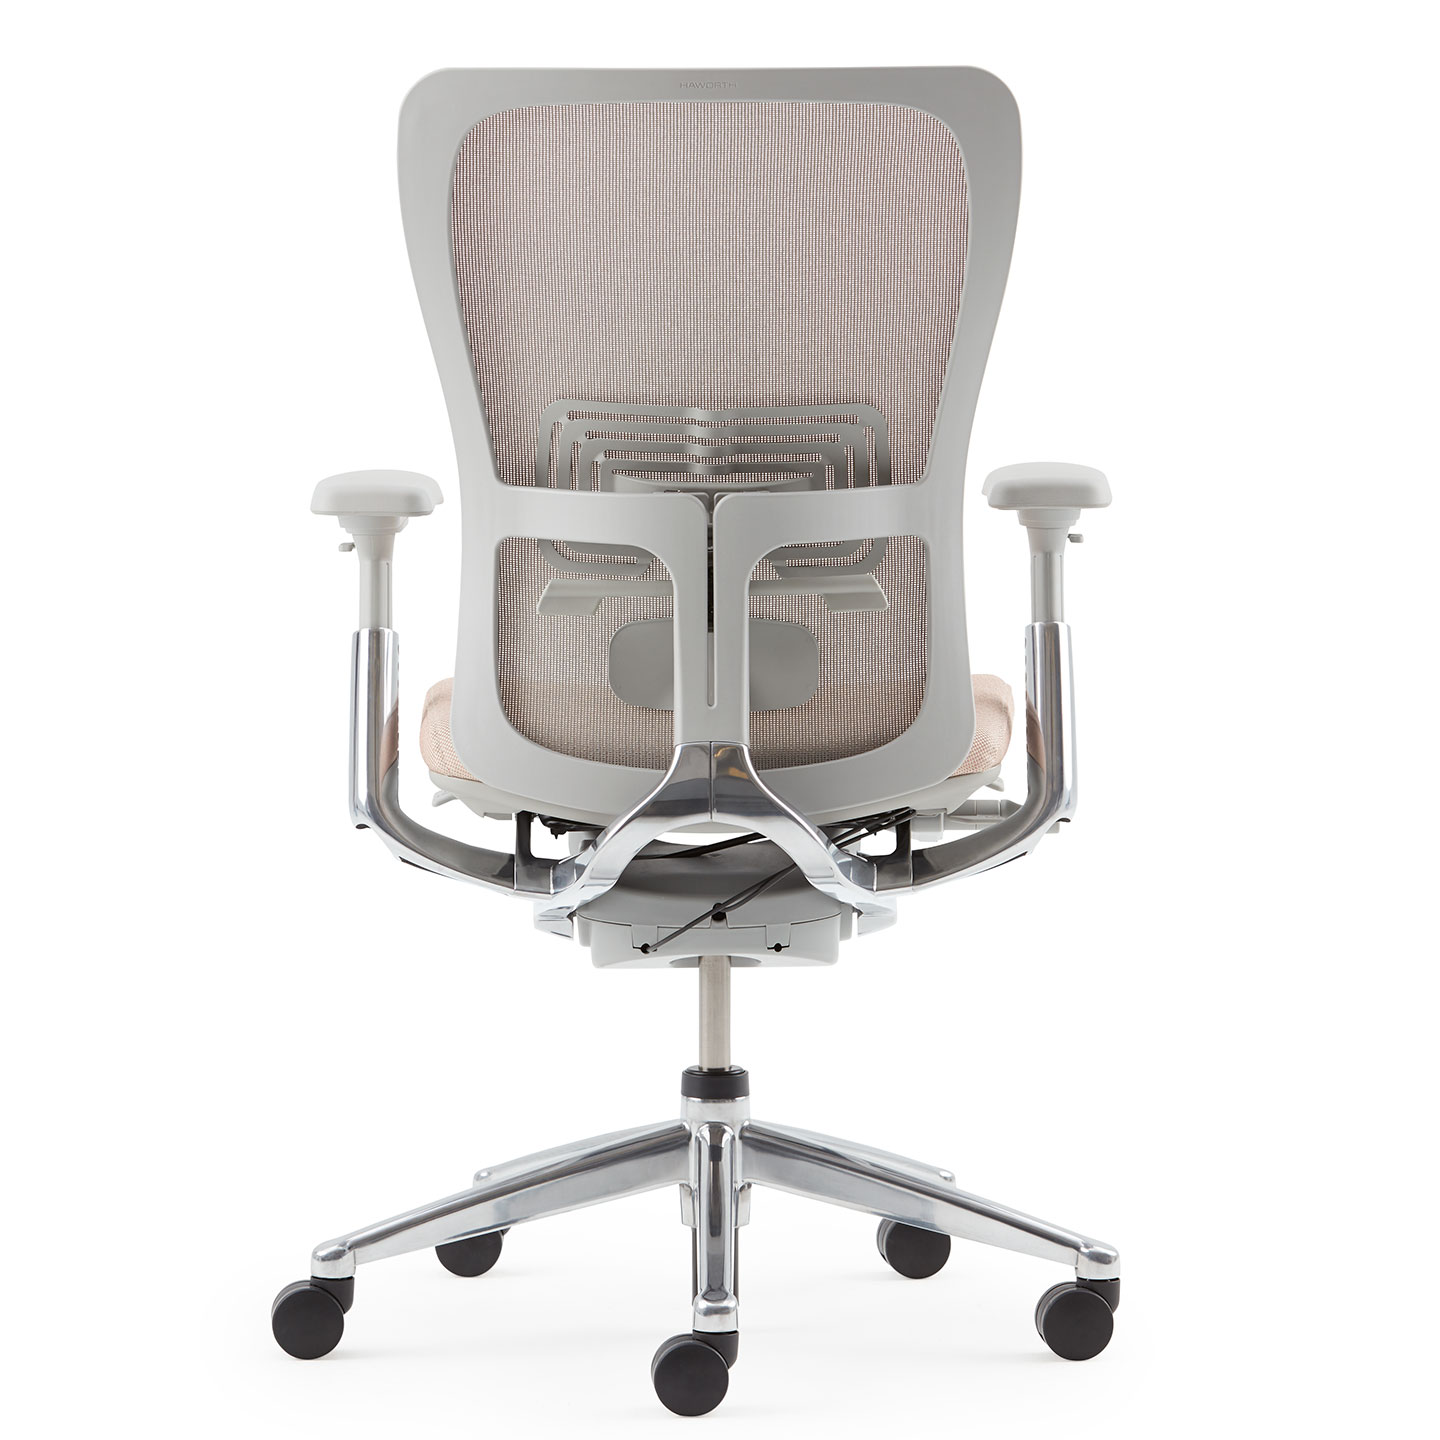 HAWORTH ZODY task office chair Fully loaded & Adjustable Arms 4D -gray frame 